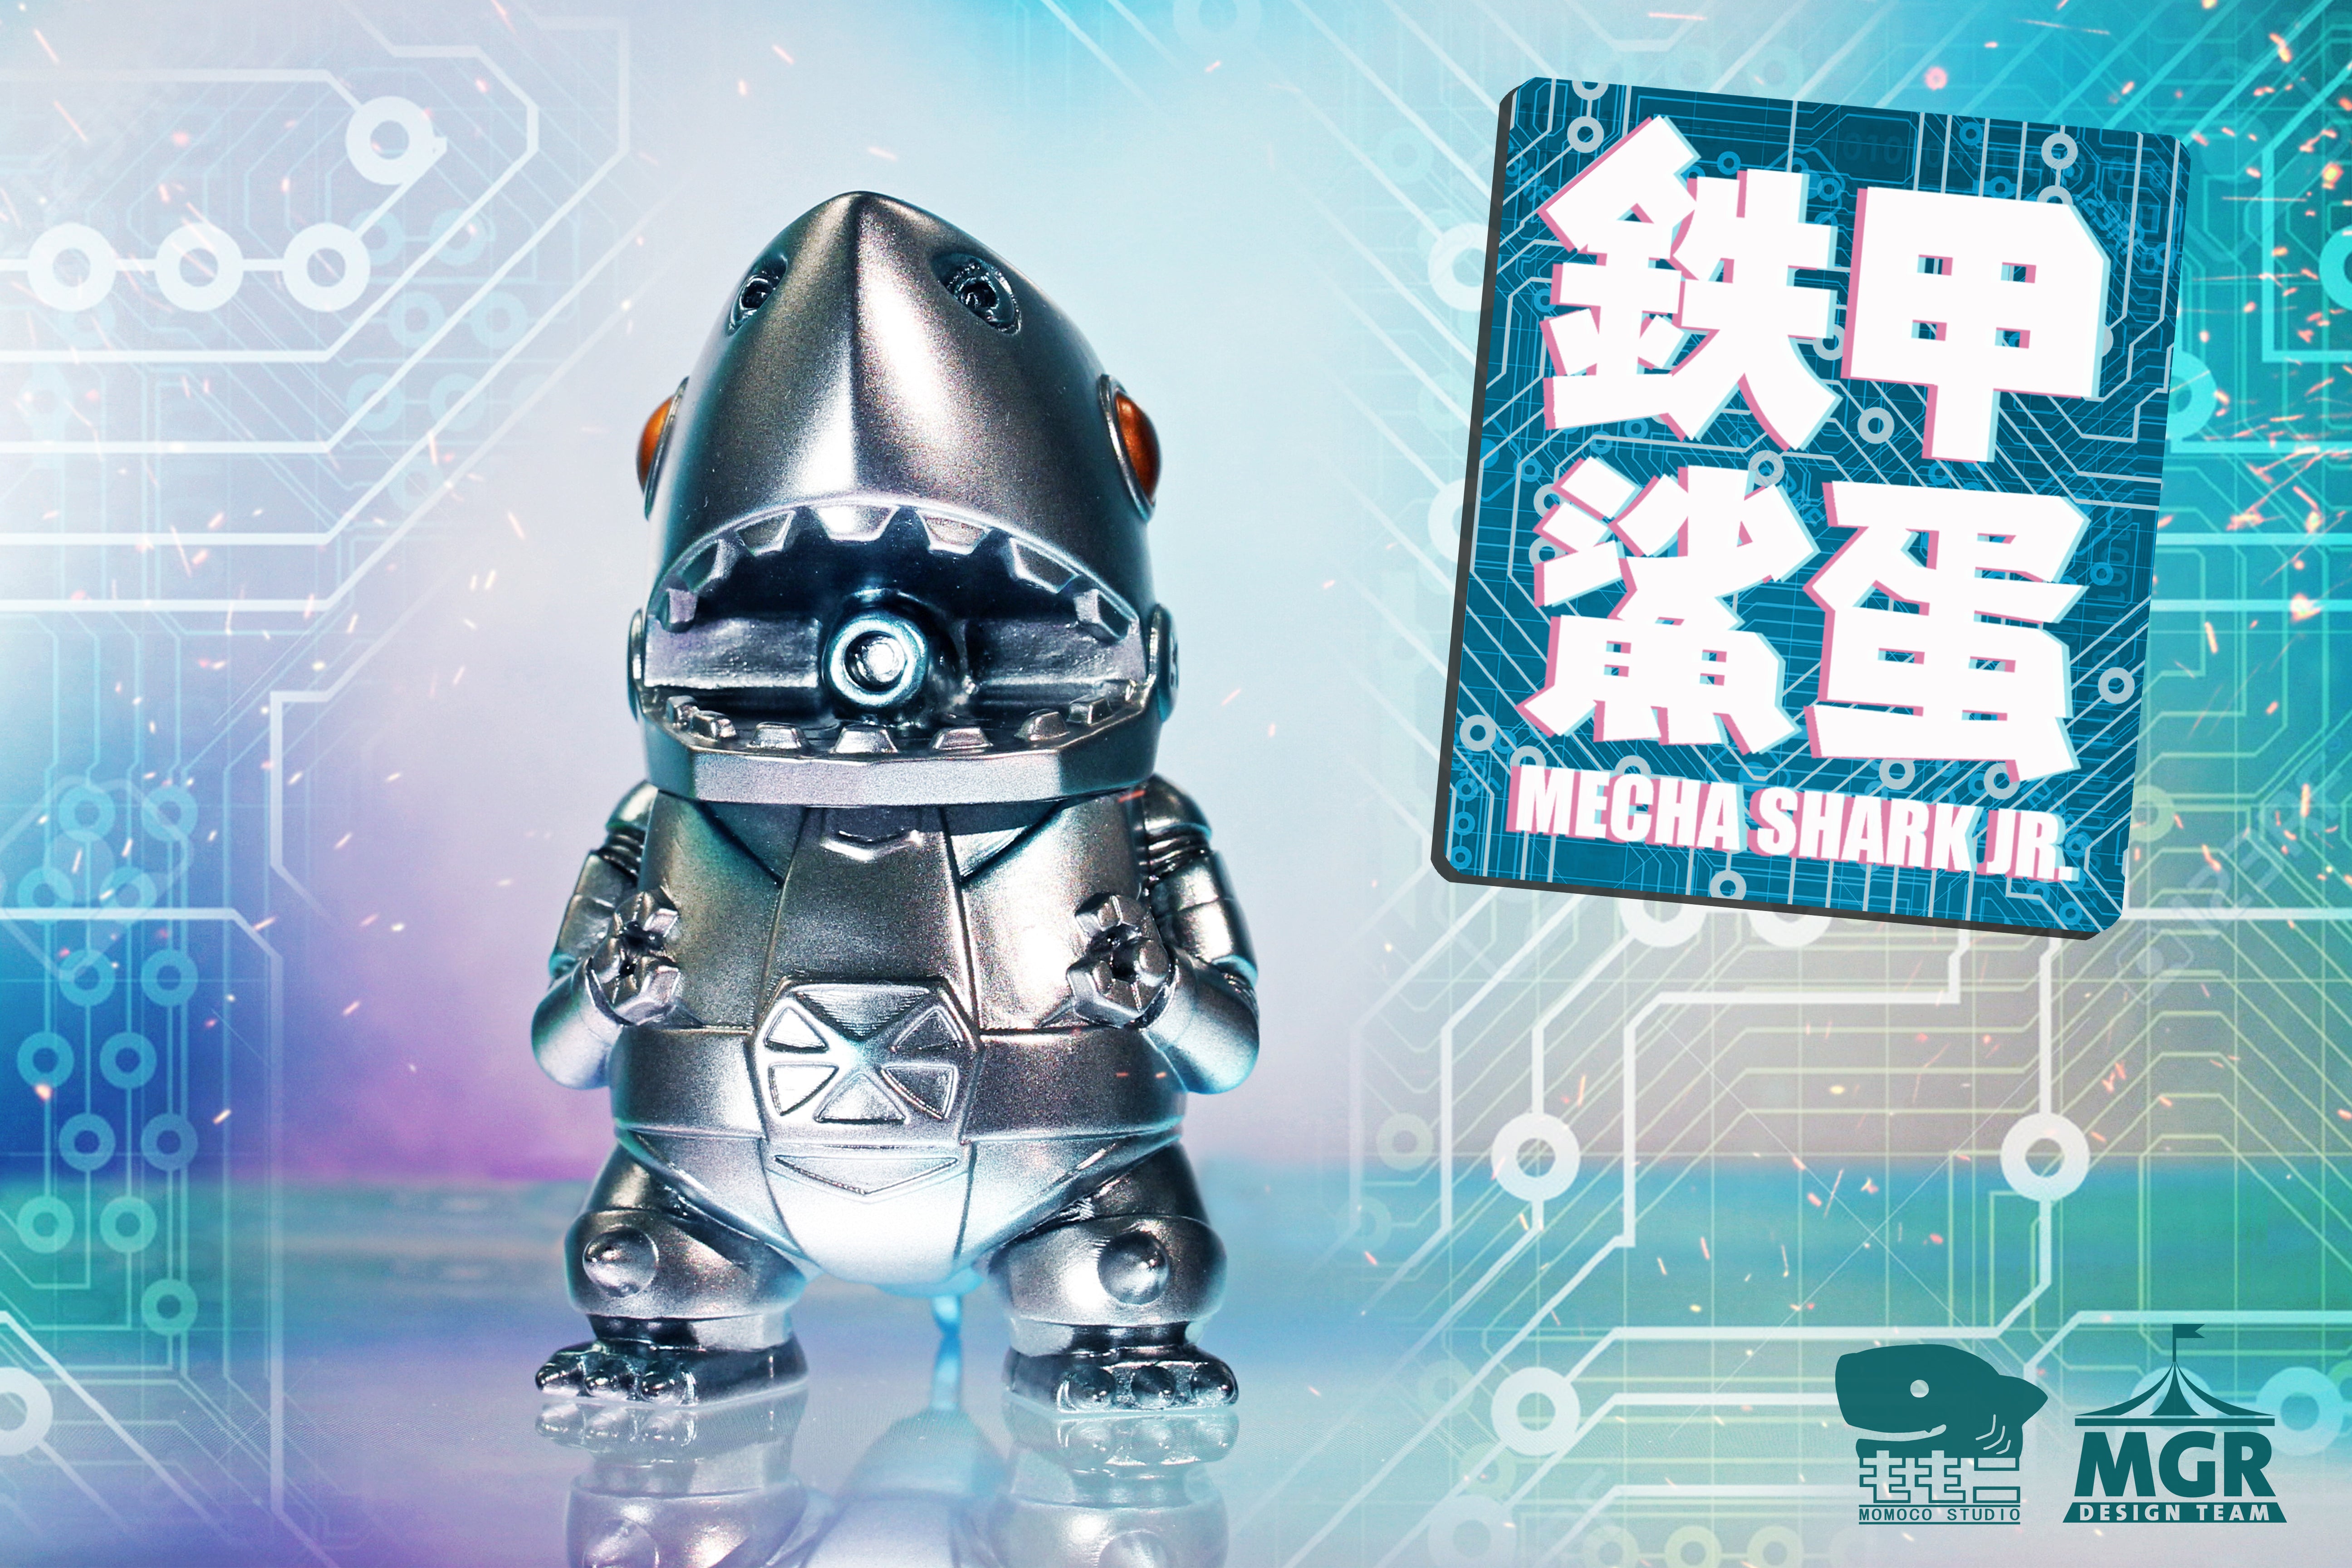 Baby Shark Lords Super Steel By Momoco x MGR - Five Points Exclusive